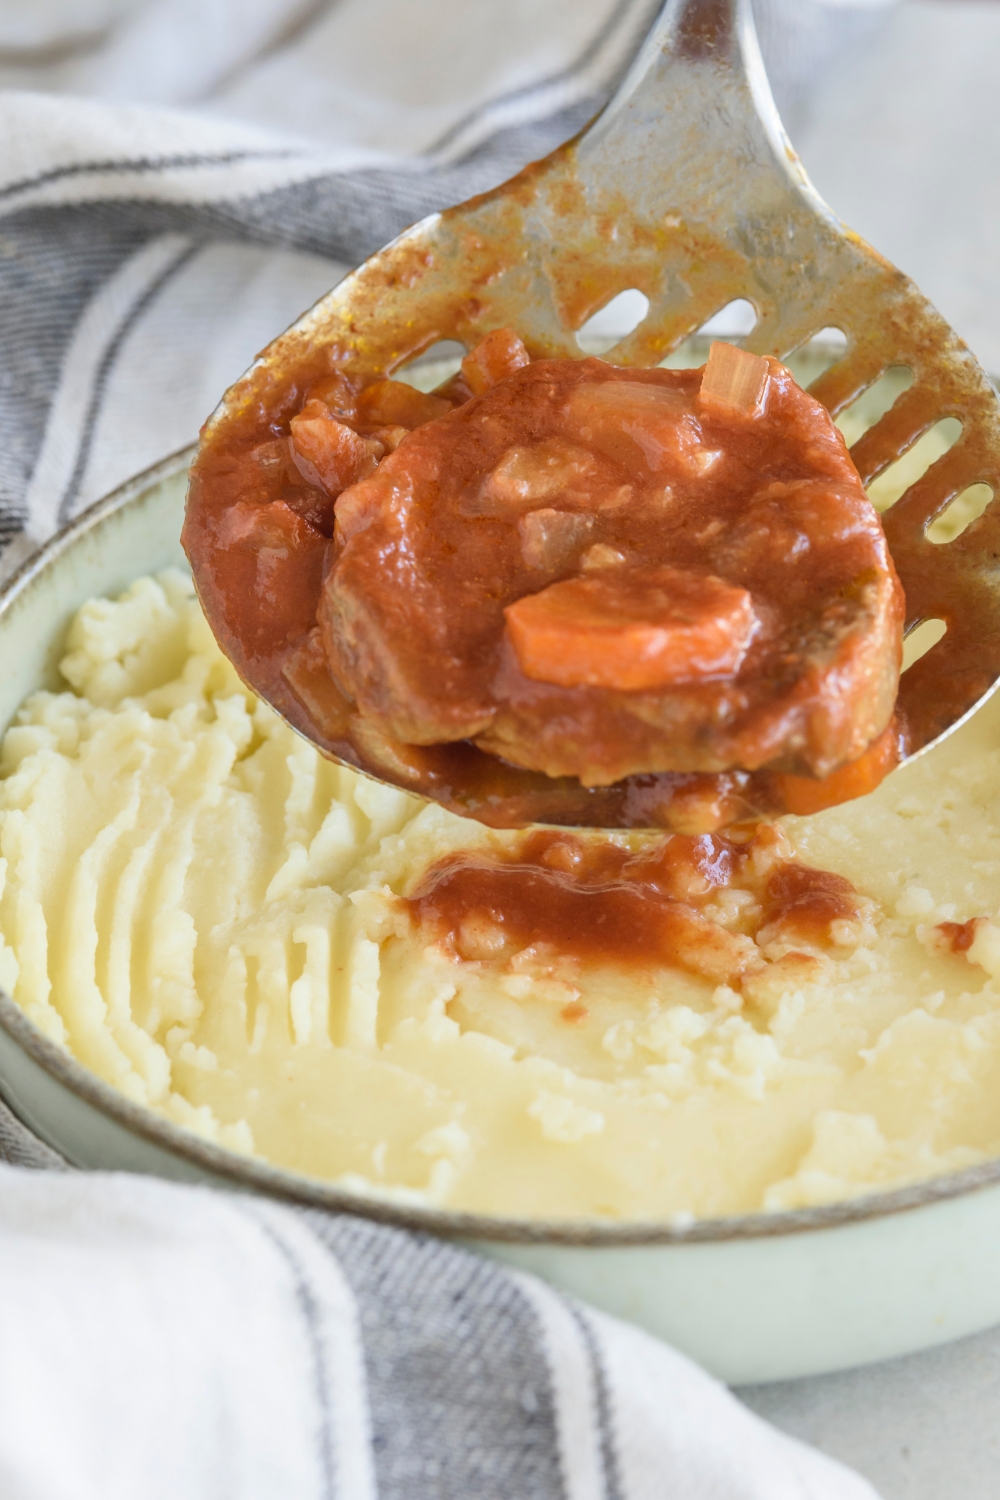 A plate of mashed potatoes with a slotted spoon spooning a cooked swiss steak covered in red gravy with bits of diced onion and carrots mixed with the gravy.